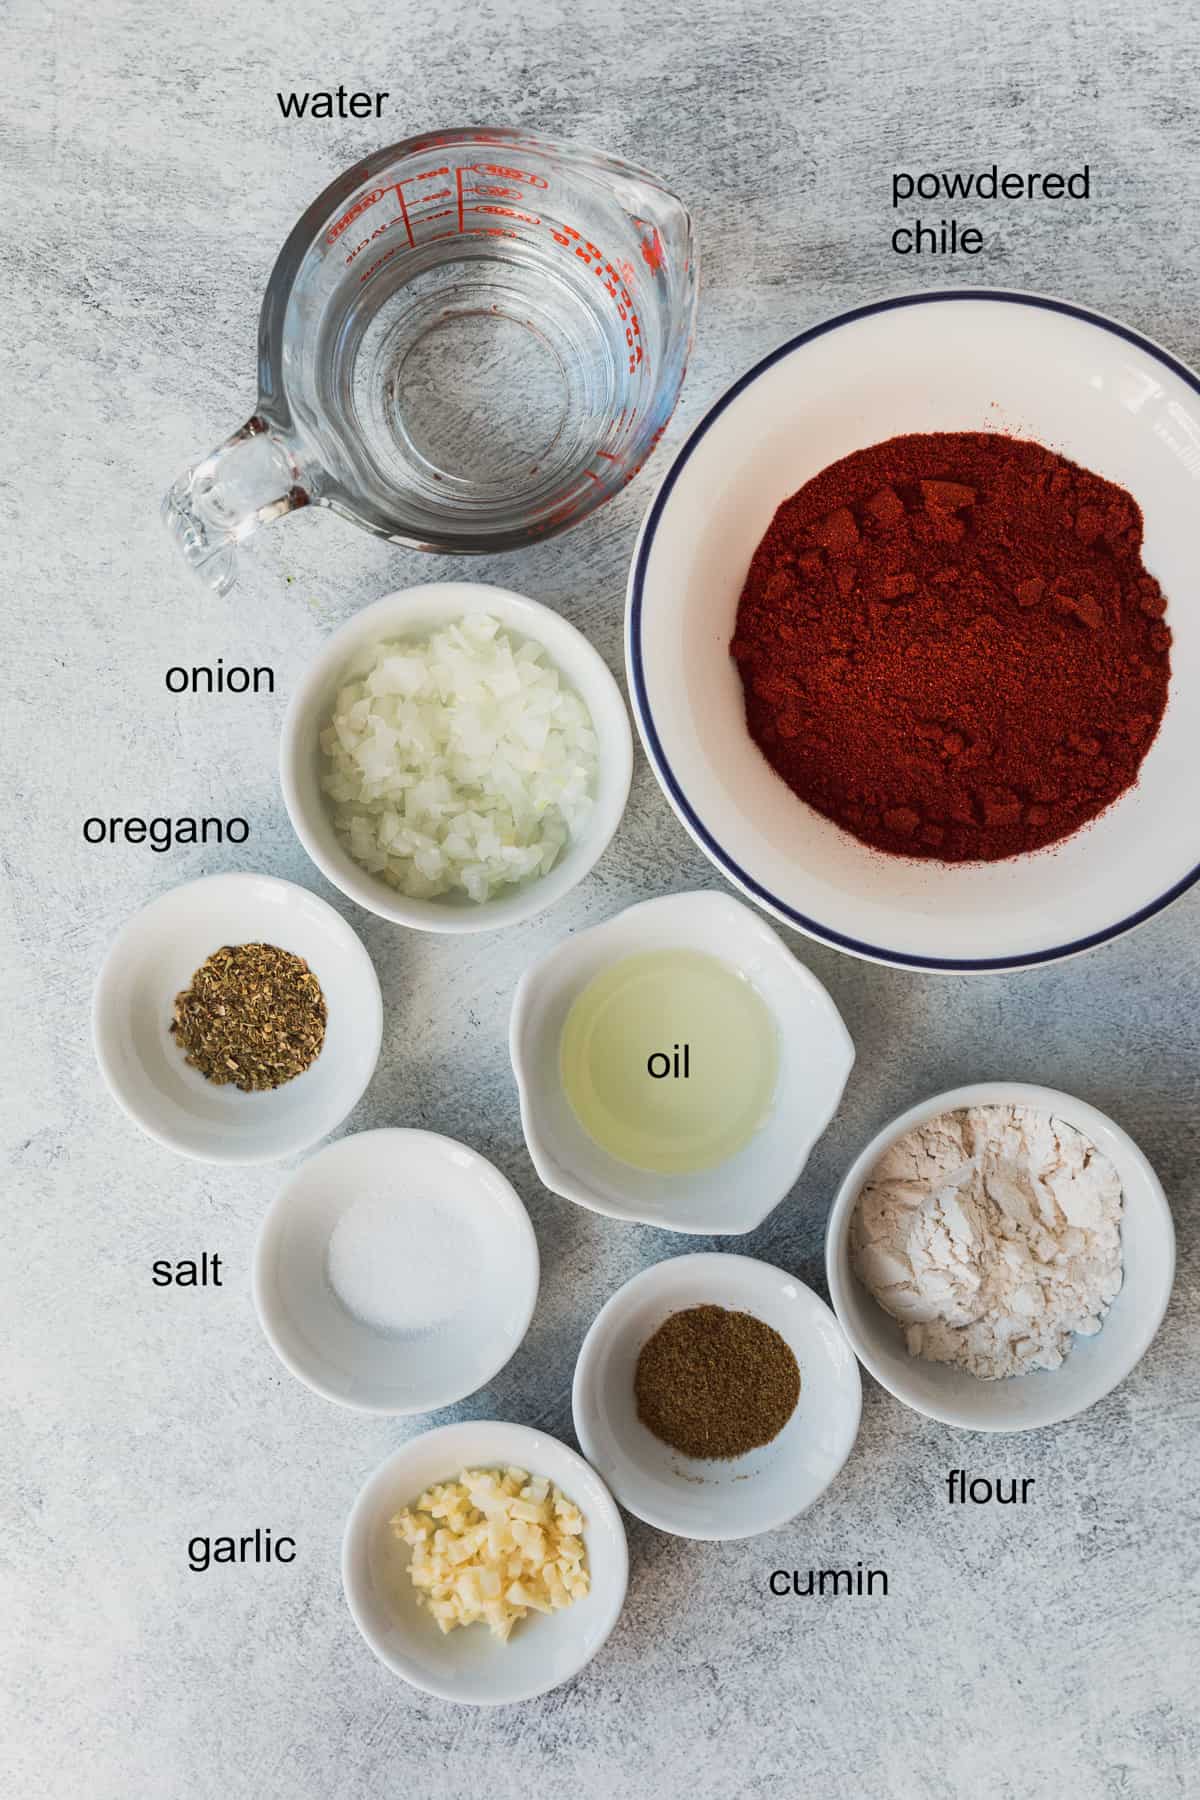 ingredients used to make the recipe